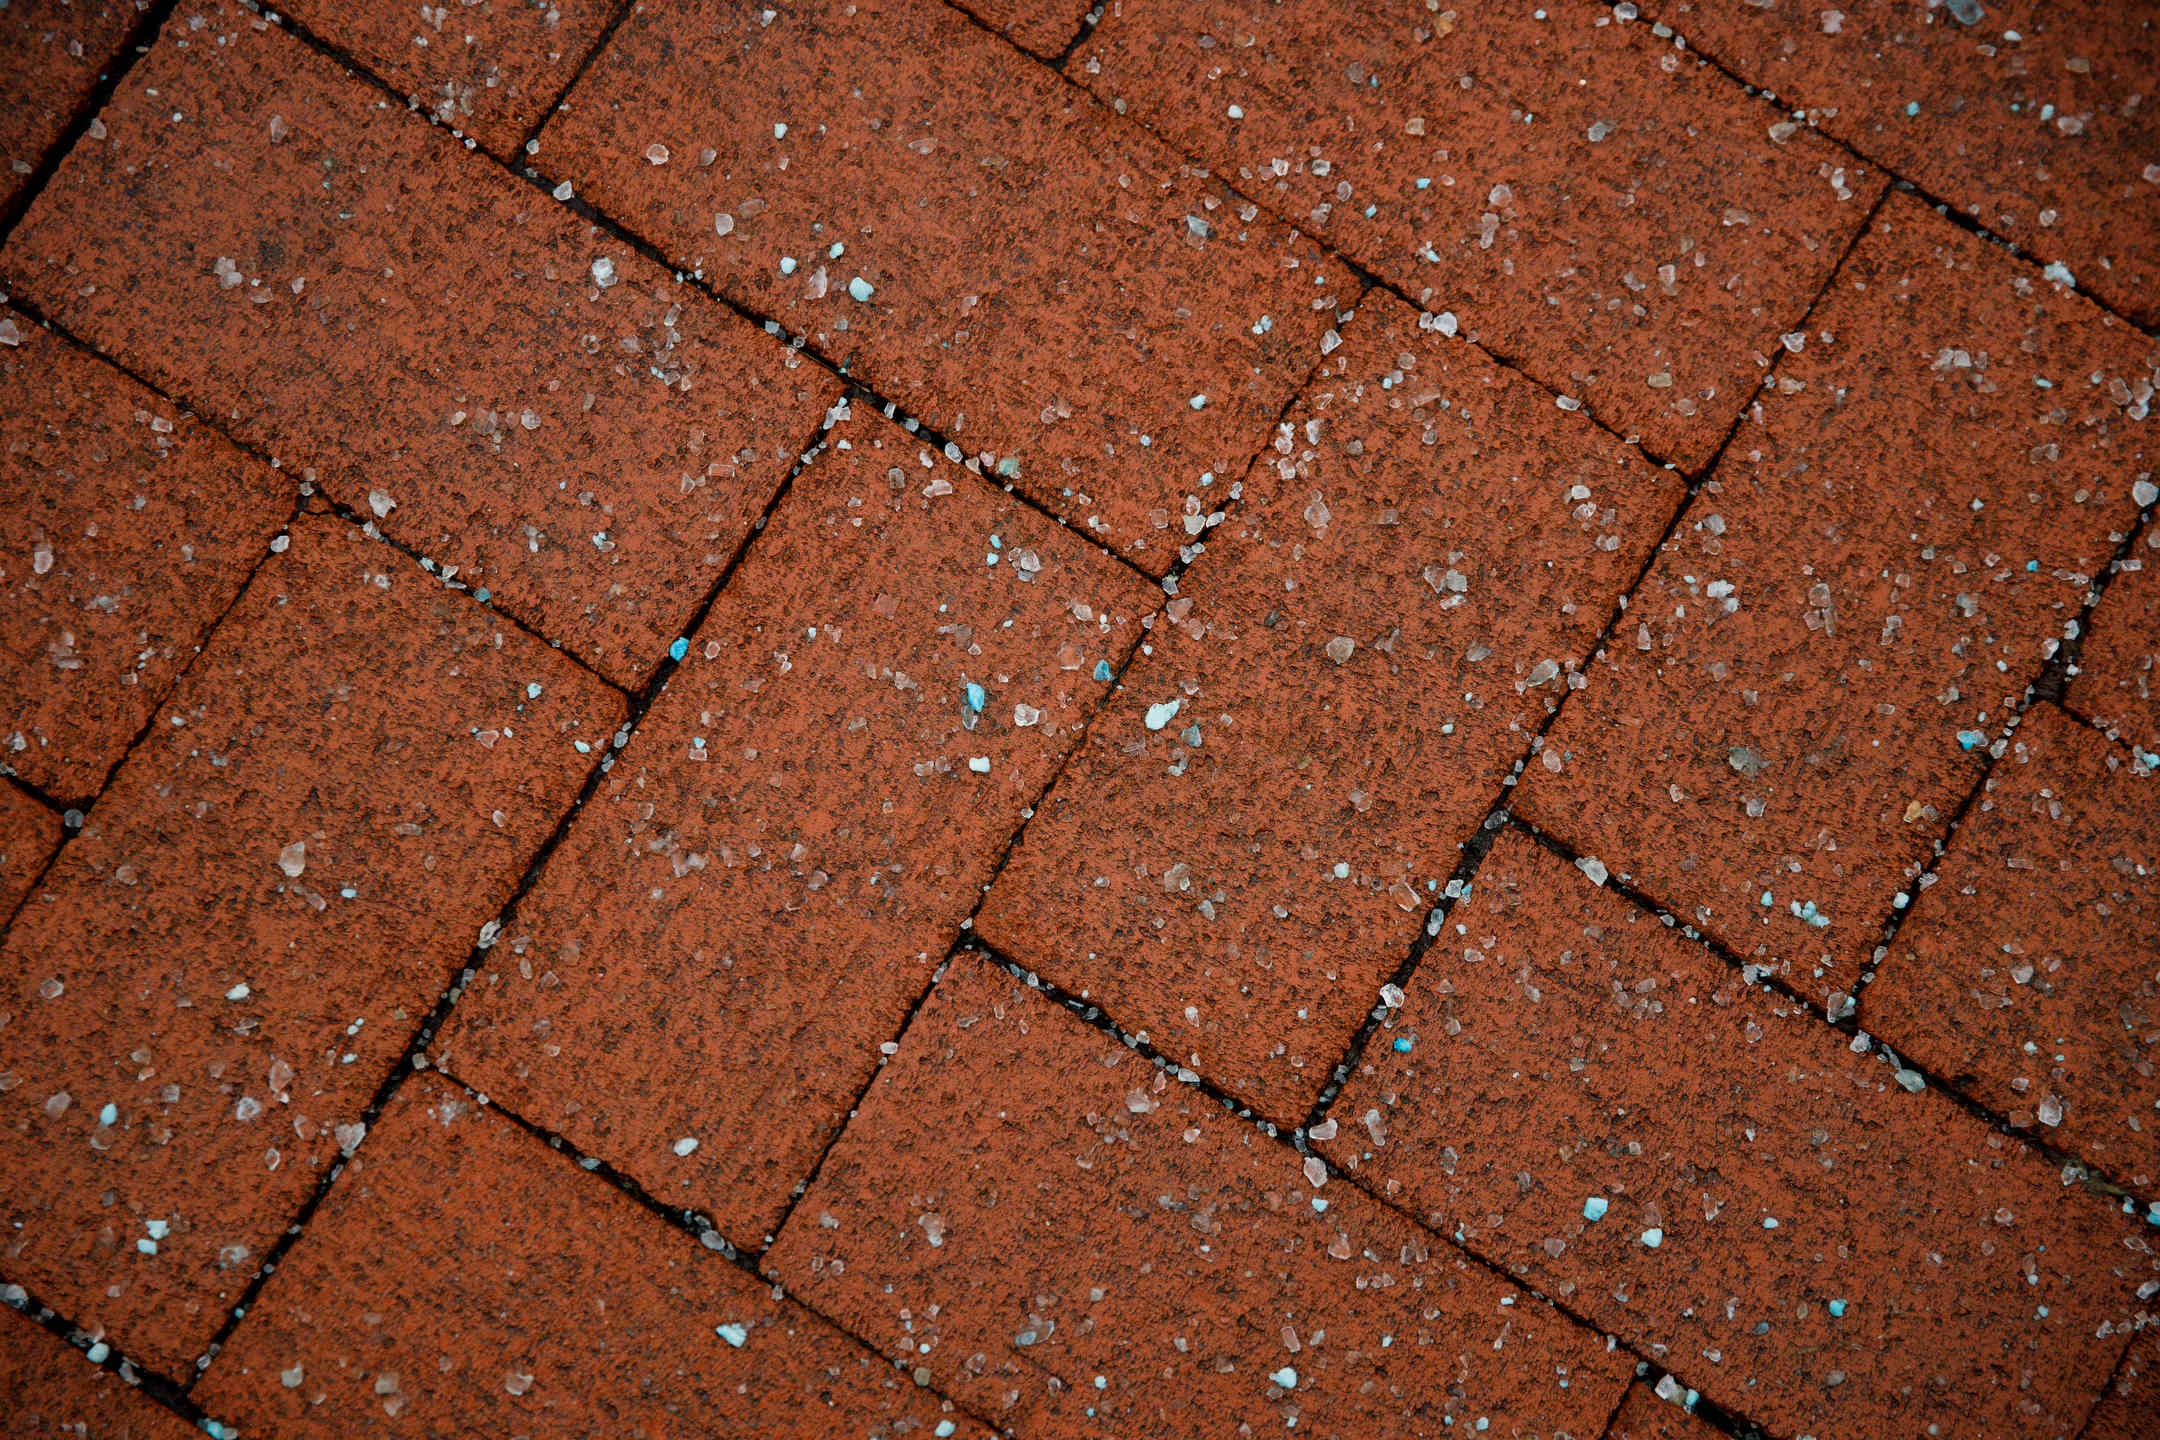 Ice melt crystals (salt) covers a brick walkway in the Old Crescent on a winter day at Indiana University Bloomington on Wednesday, Feb. 10, 2021.